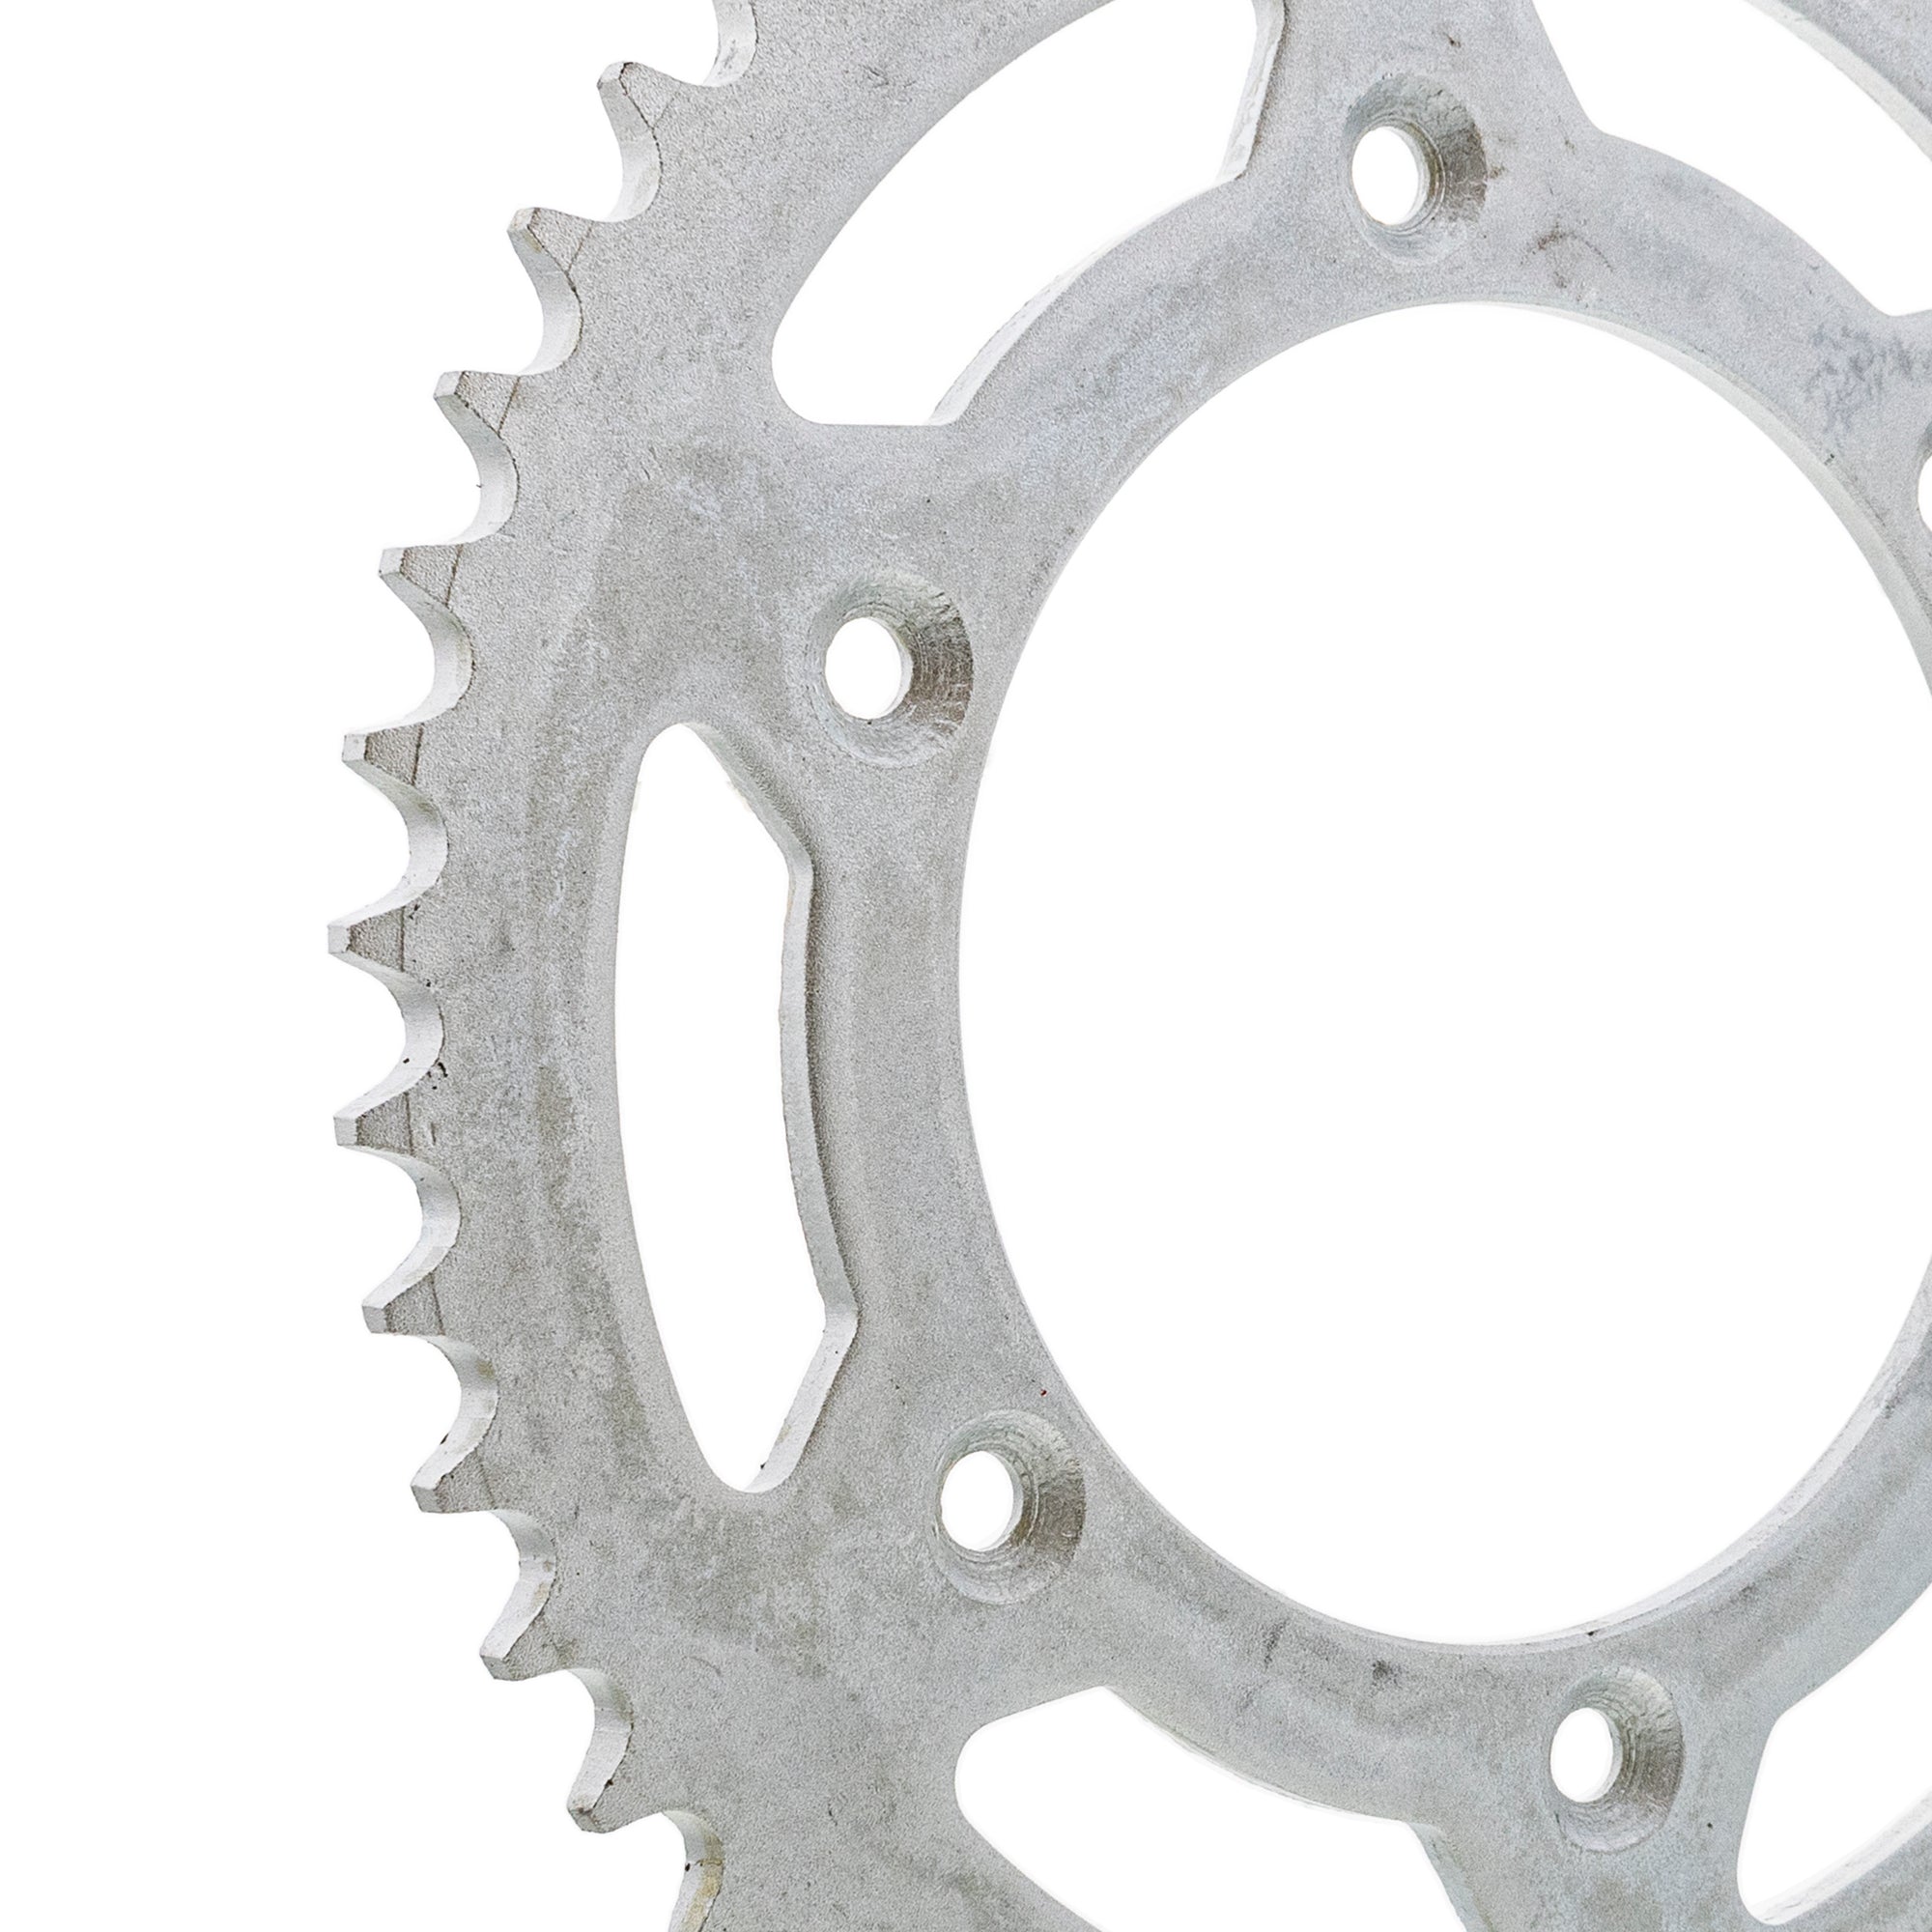 520 Pitch Front 13T Rear 48T Drive Sprocket Kit for KTM 250 450 SX XCW